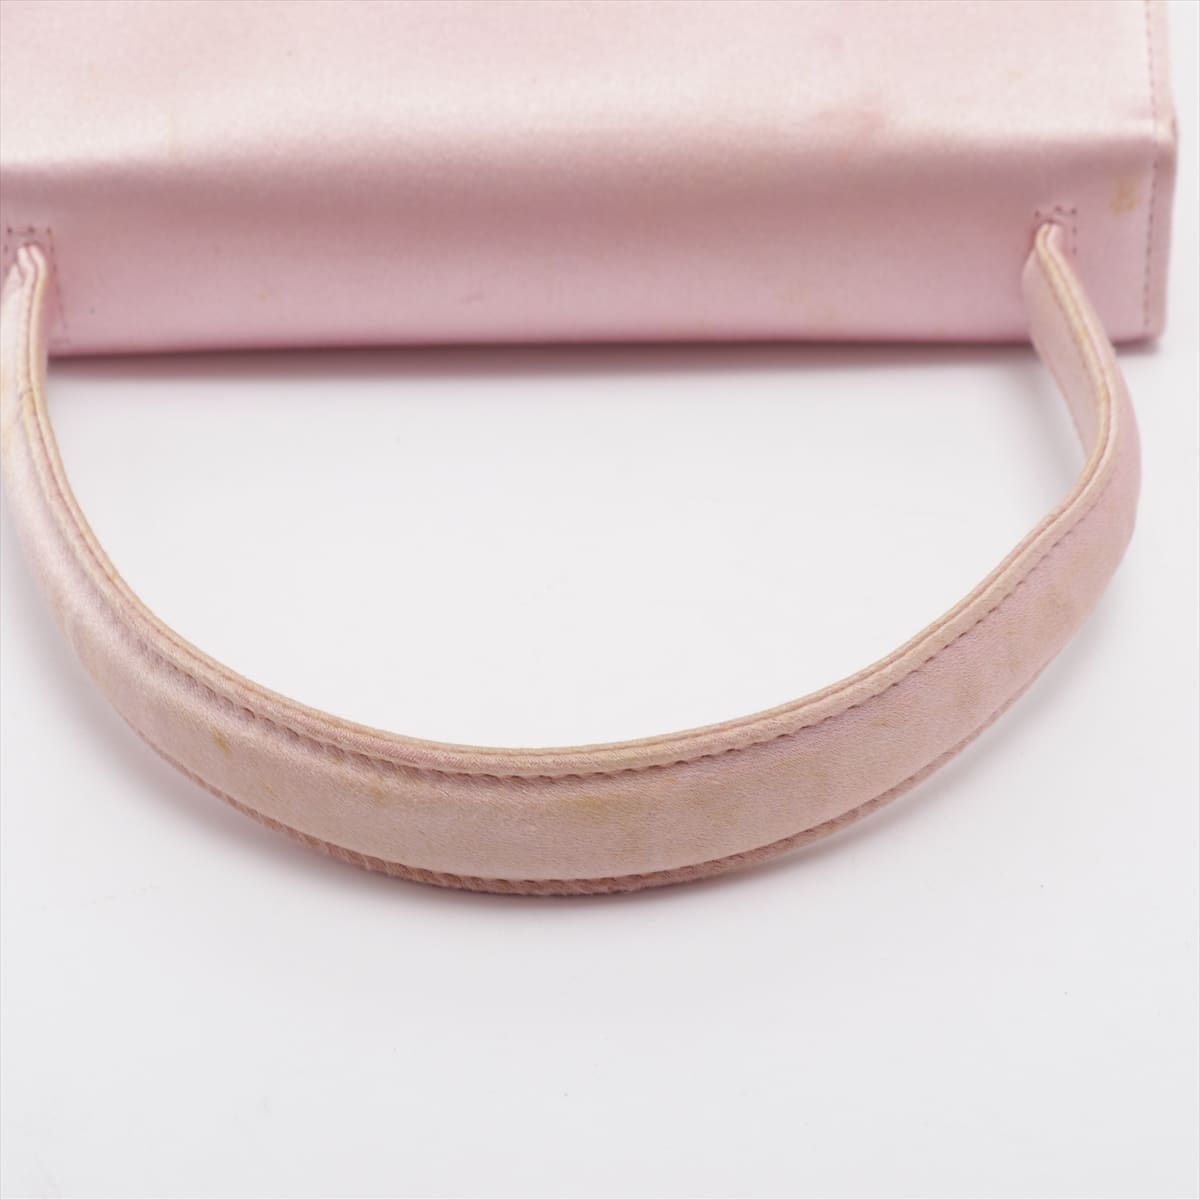 Chanel Coco Mark Satin Hand bag Pink Gold Metal fittings